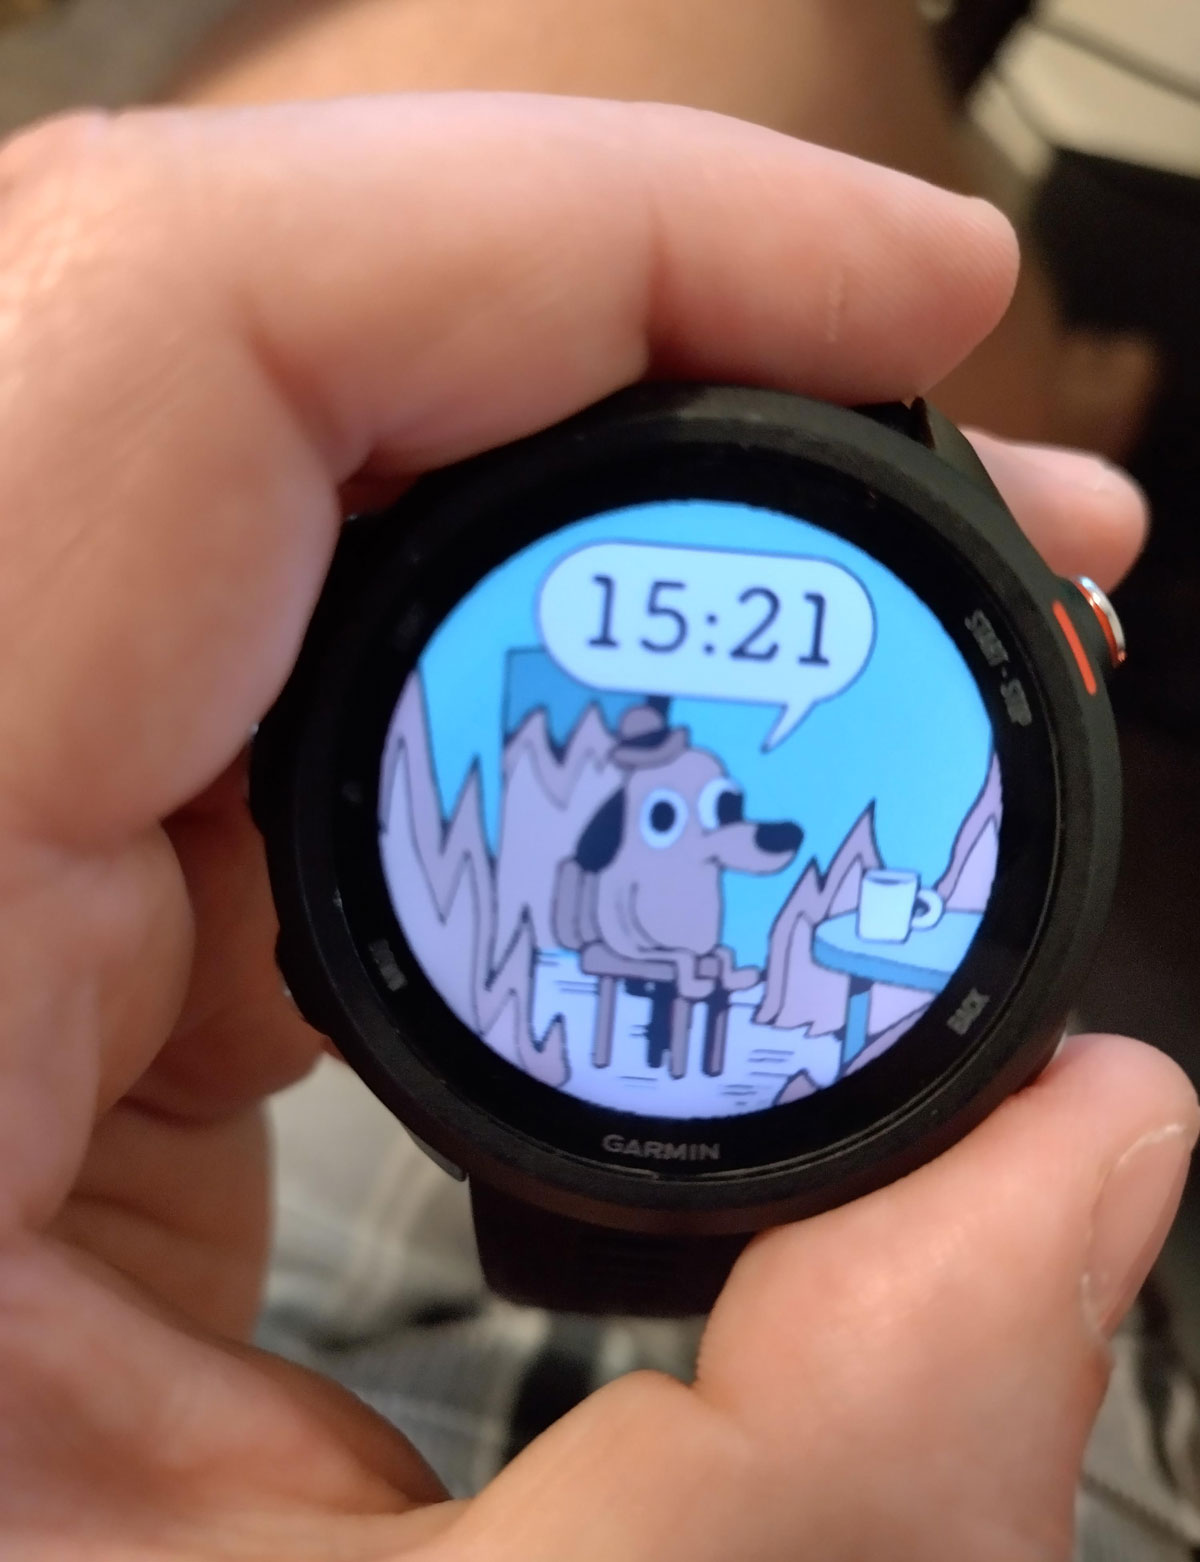 Found a perfect watch face for the Australian summer